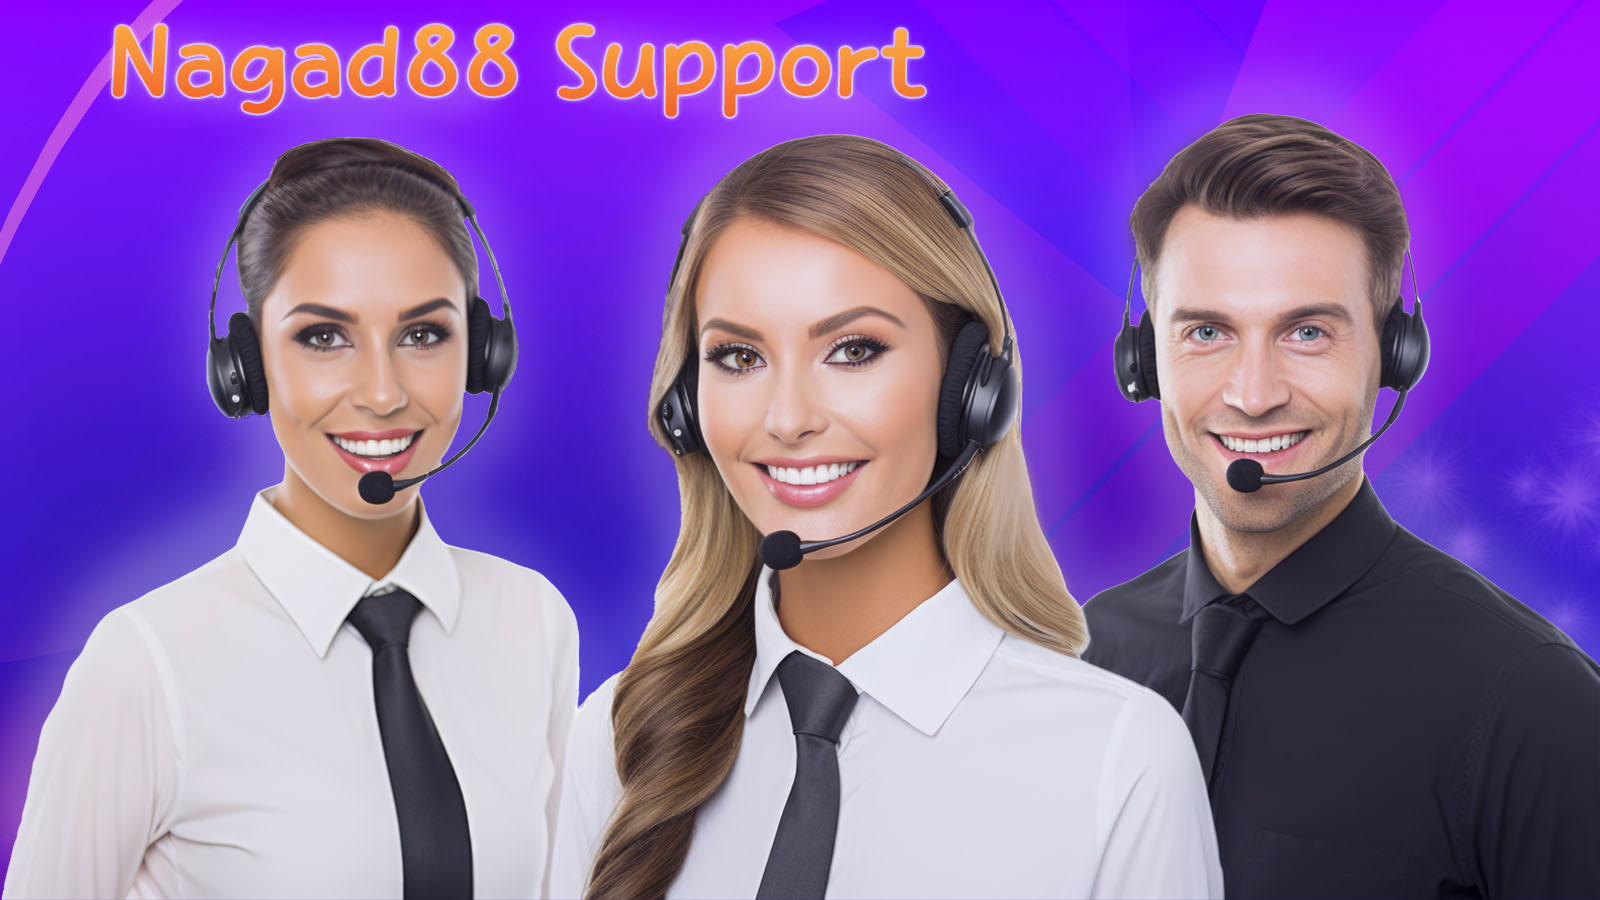 Nagad88 Support provides comprehensive help to users